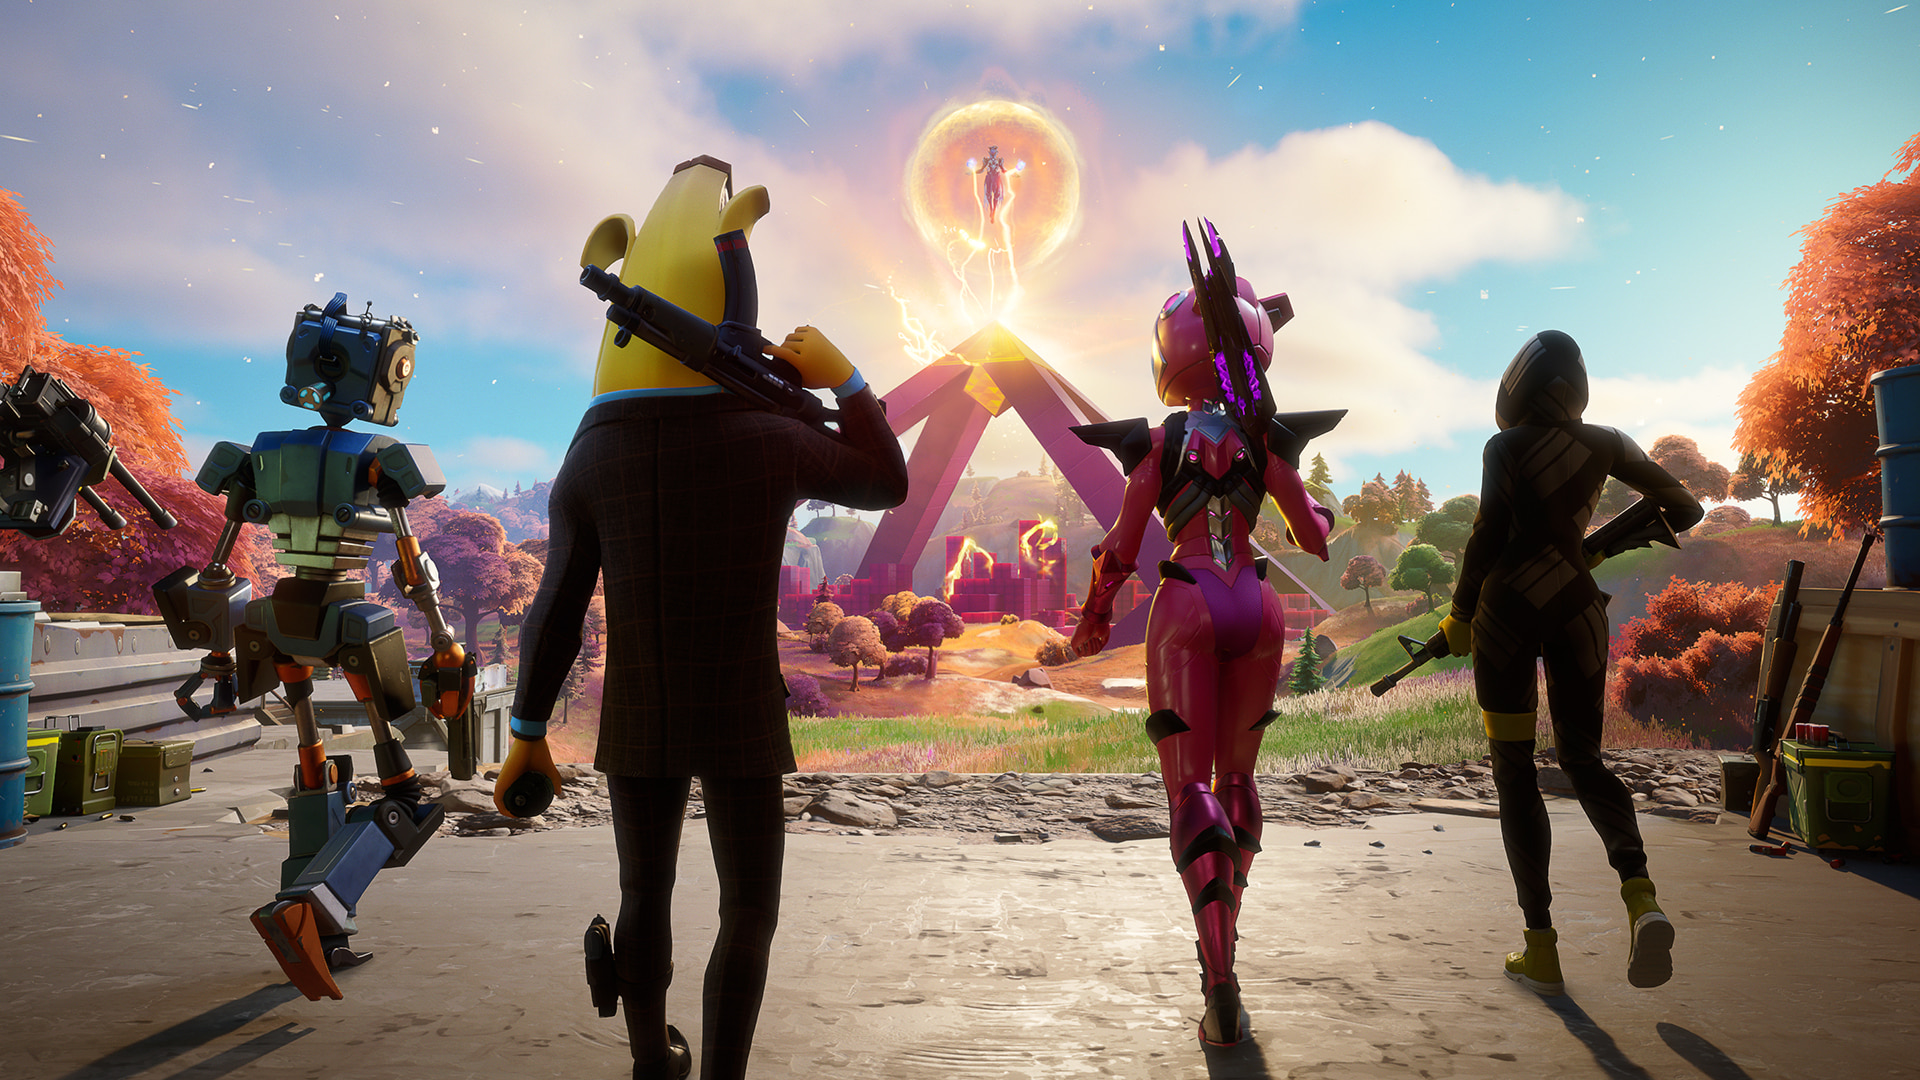 'Fortnite' Chapter 2 will end with a big in-game event on December 4th